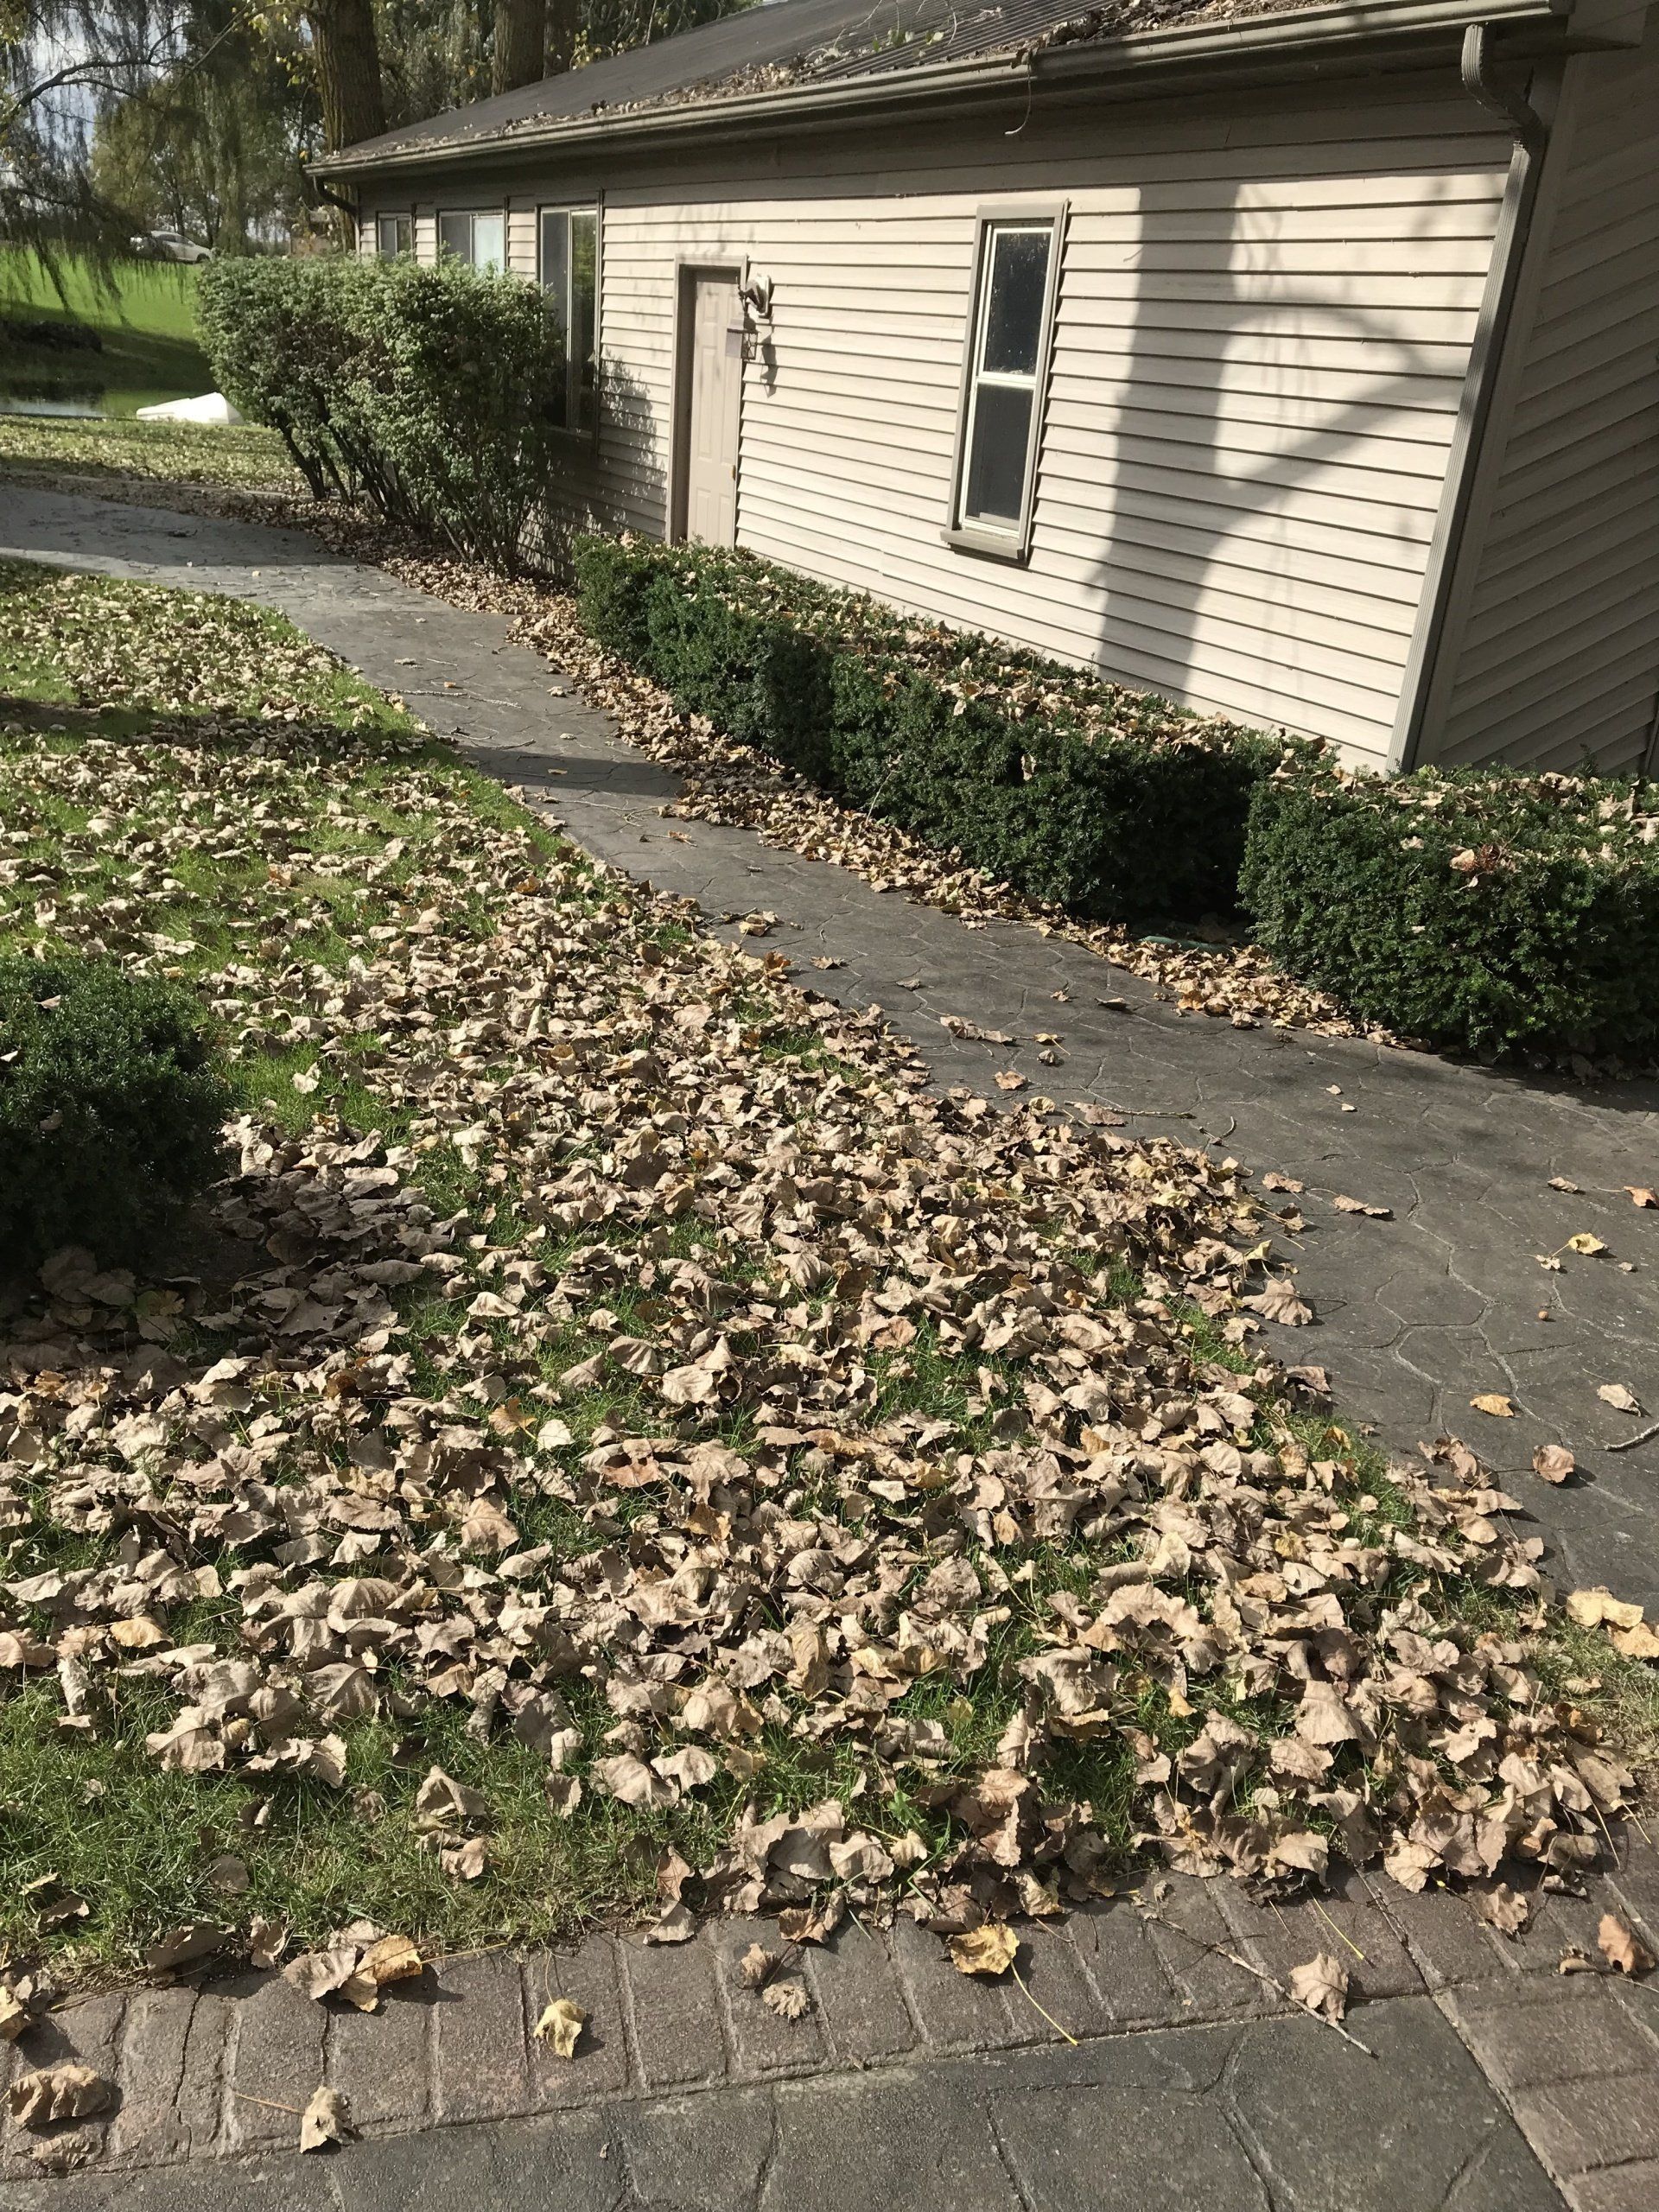 leaves scattered on the lawn and walkway